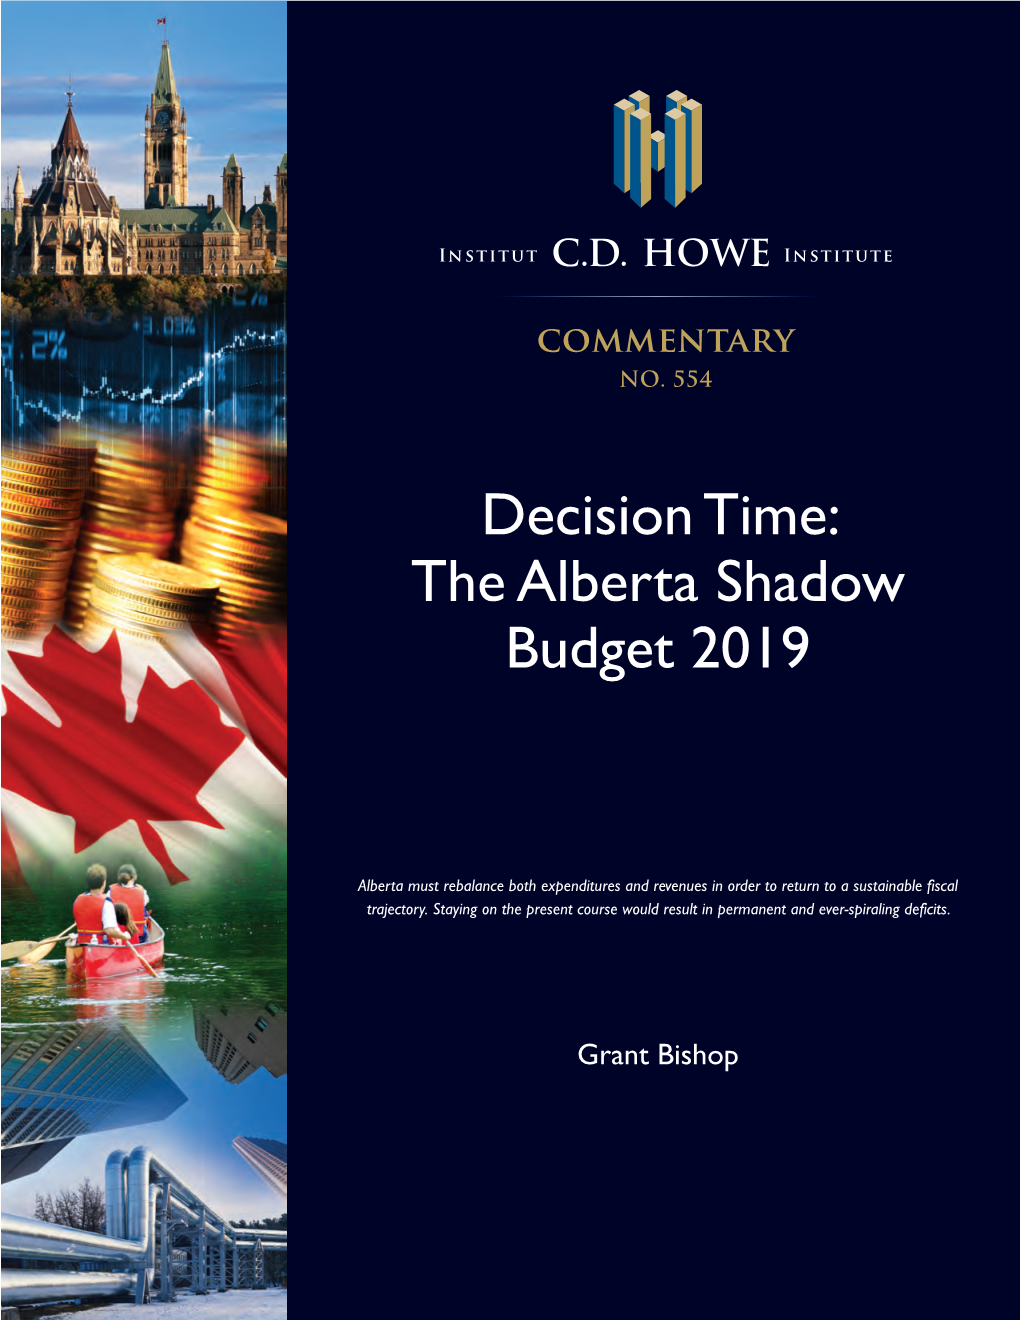 Decision Time: the Alberta Shadow Budget 2019